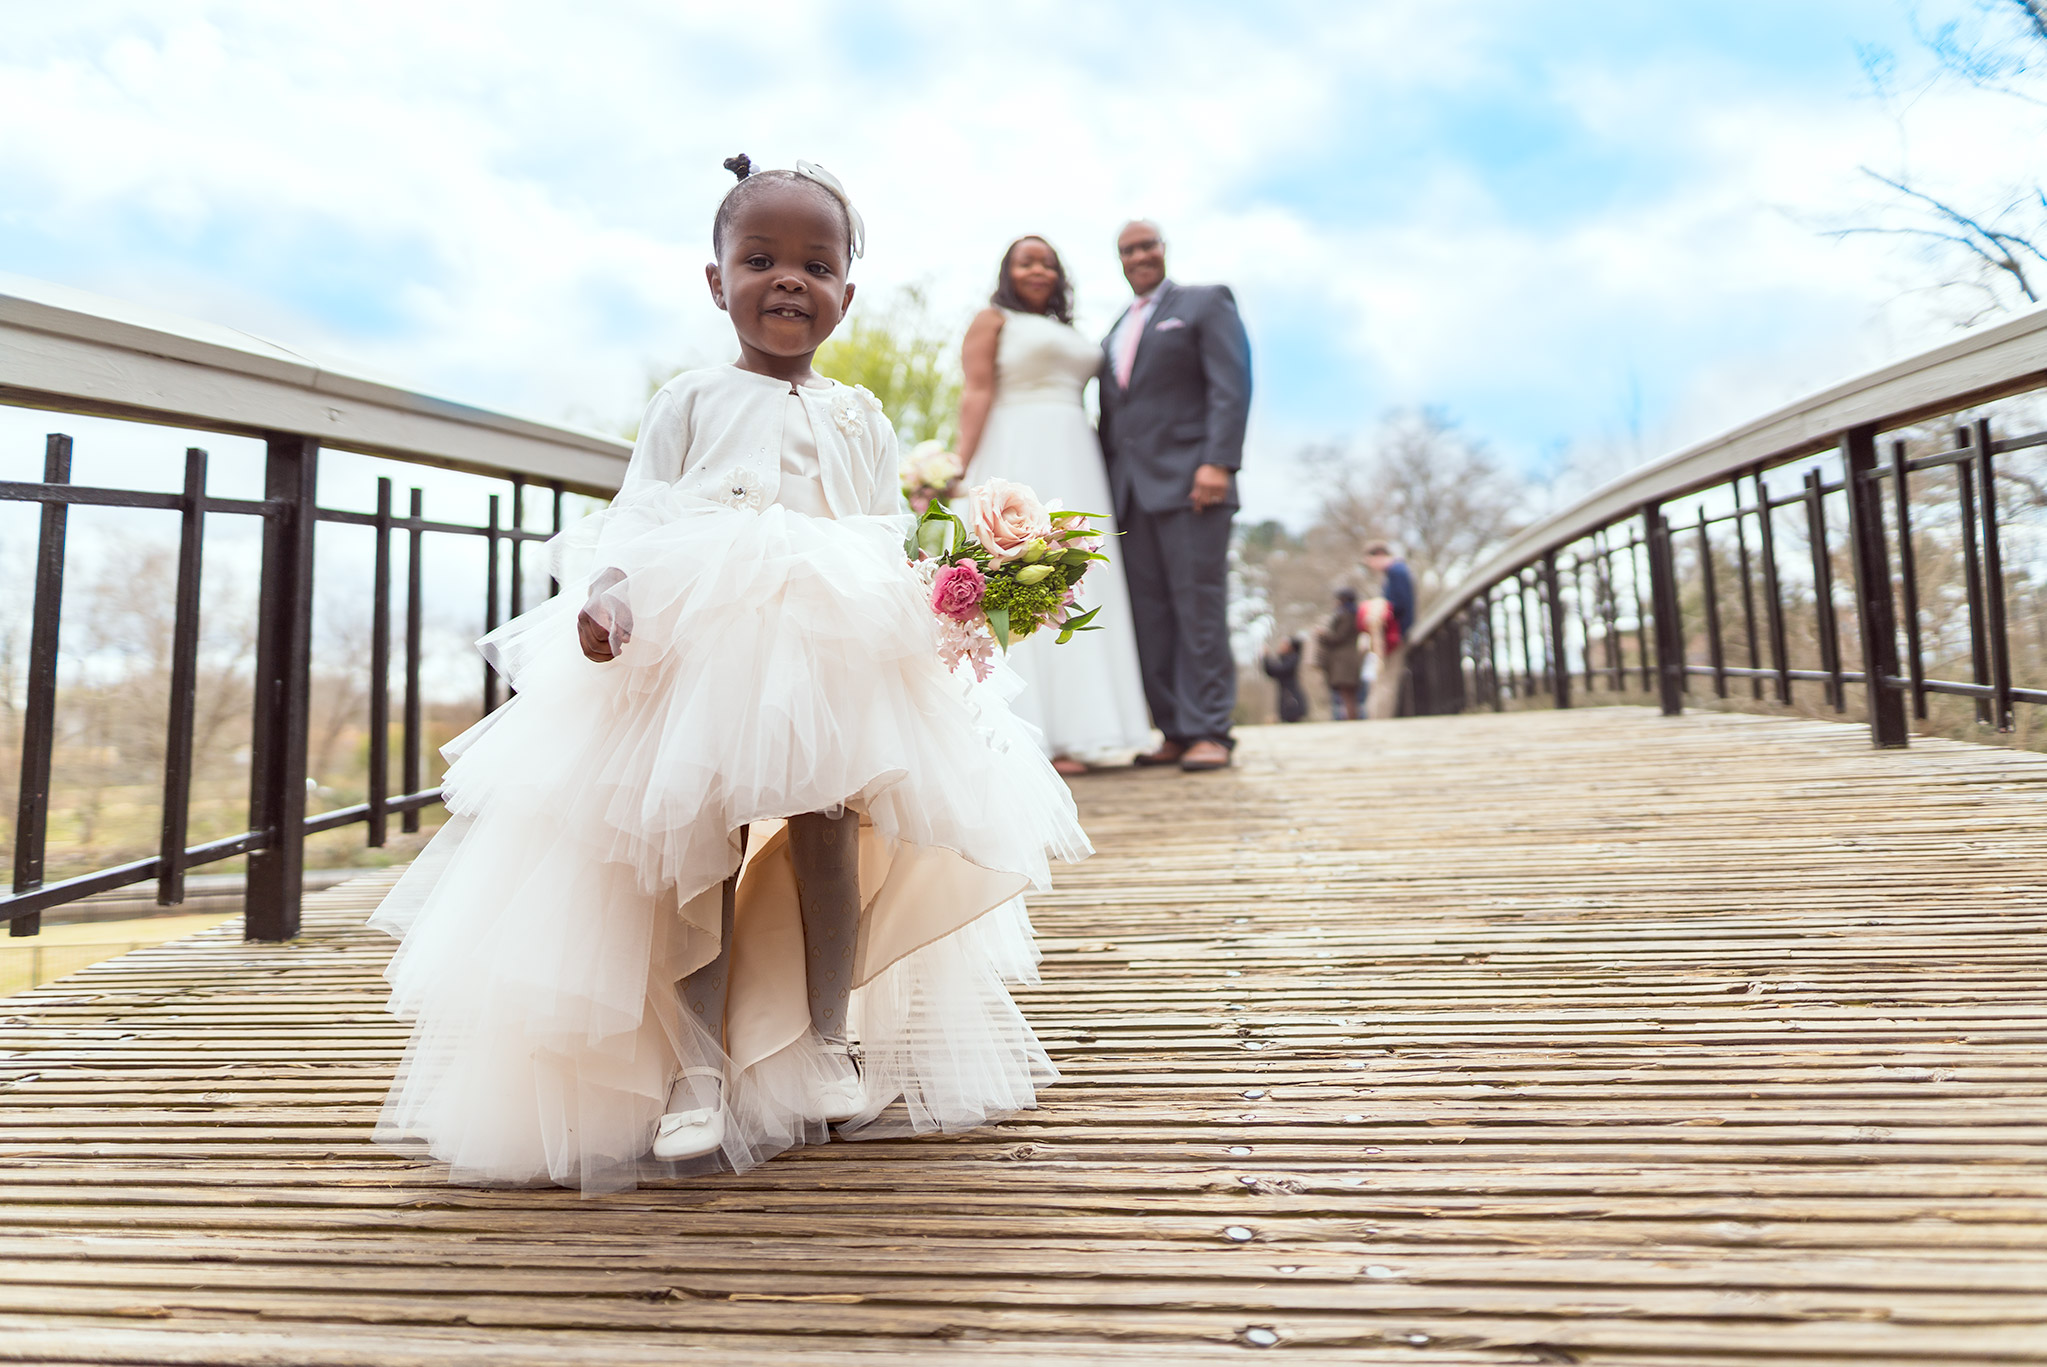 cute kid candid wedding pose with parent at pullen park 2048 1367